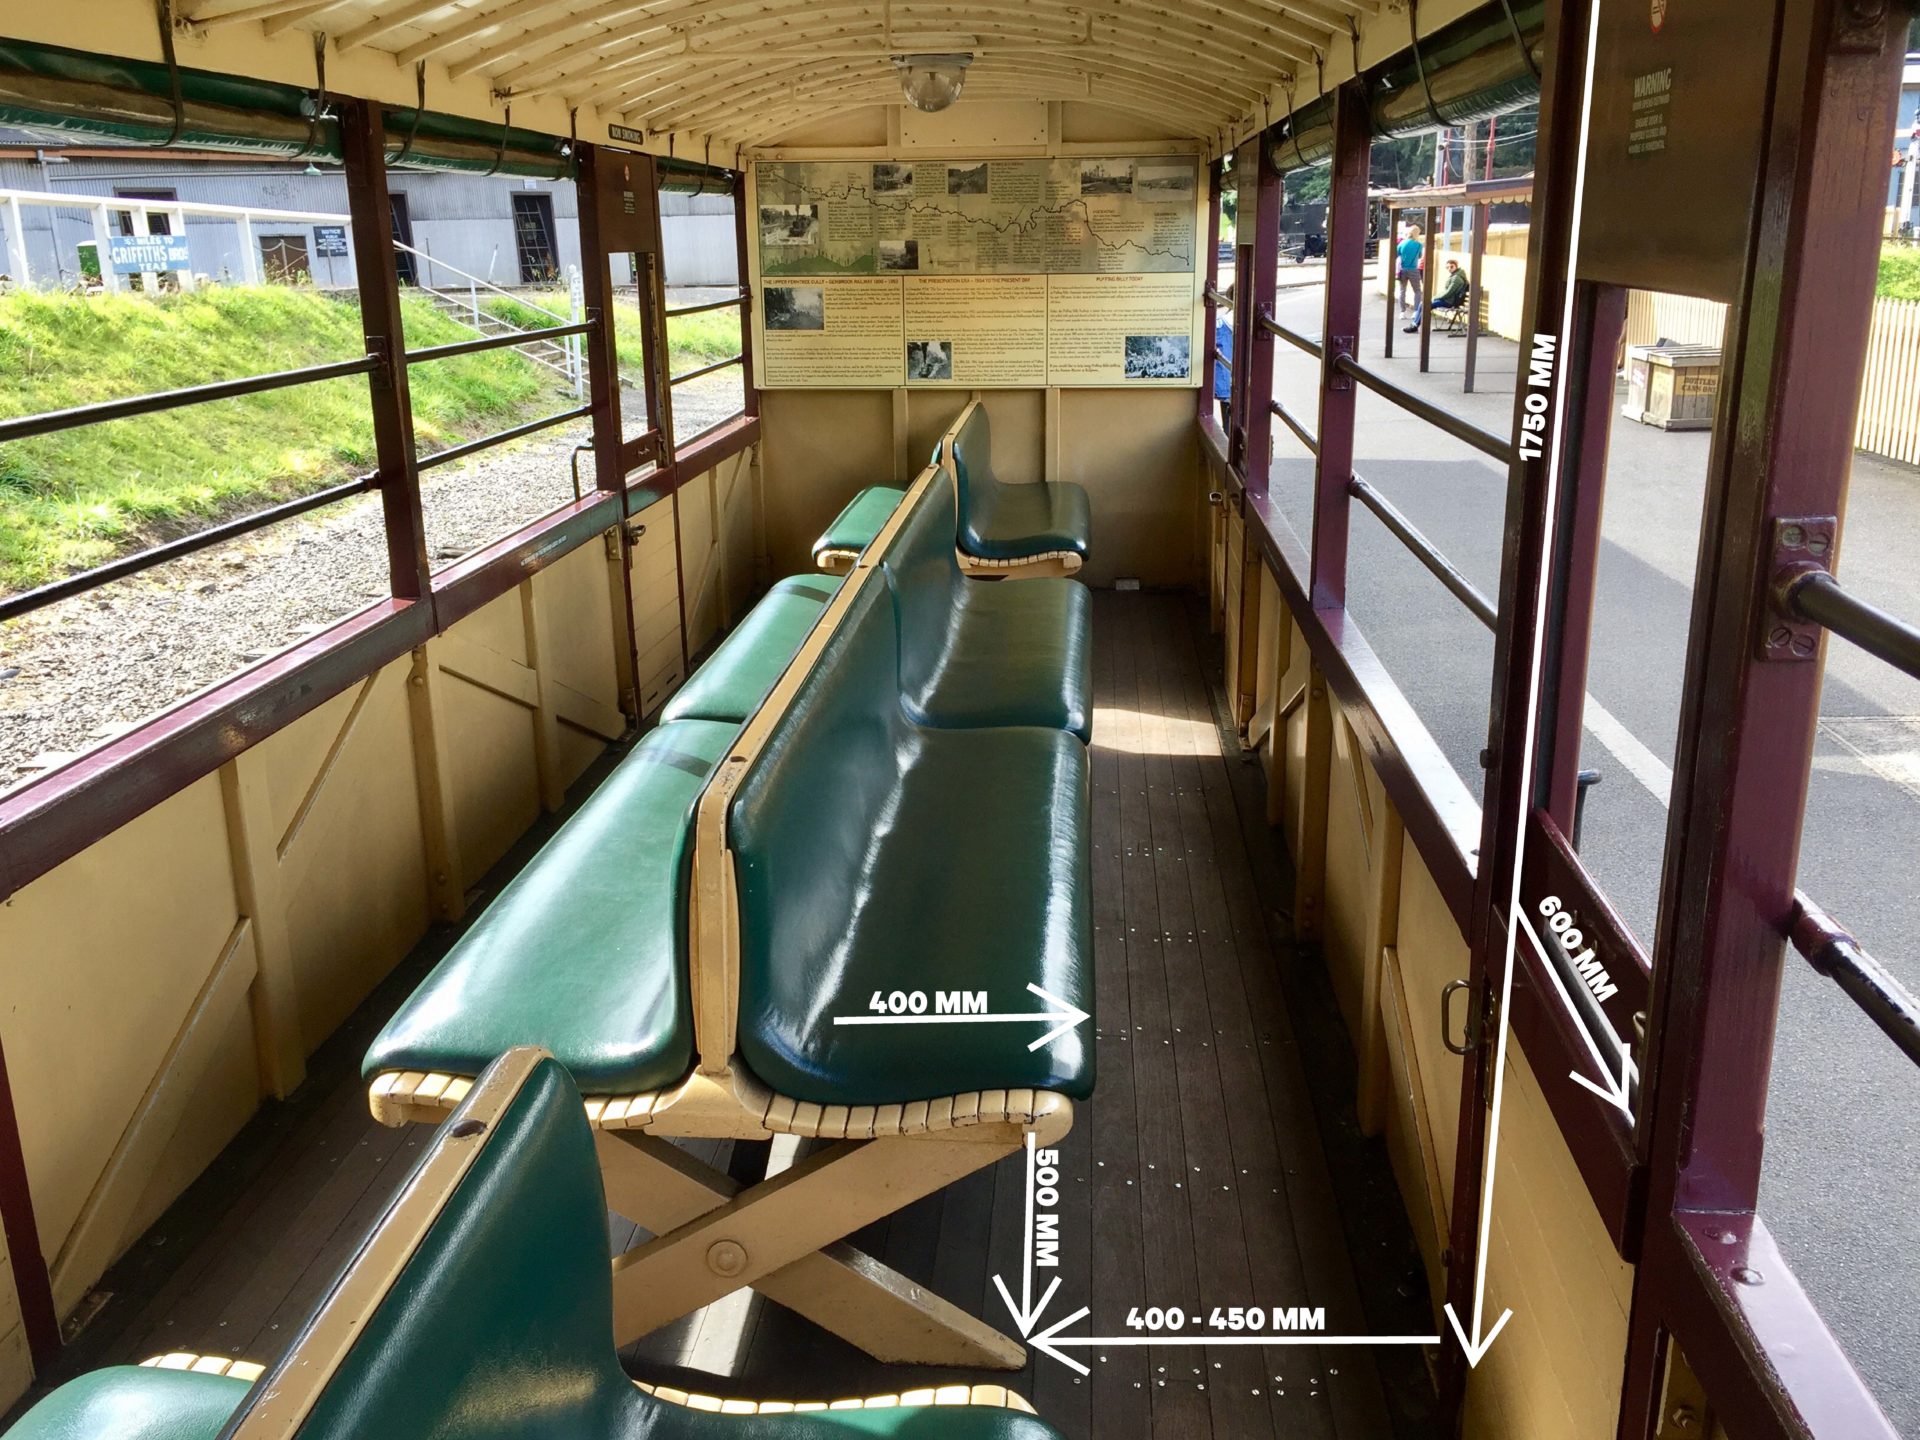 Carriage dimensions on the inside, including height from platform. For full details, please refer to the bullet points further down on this page.